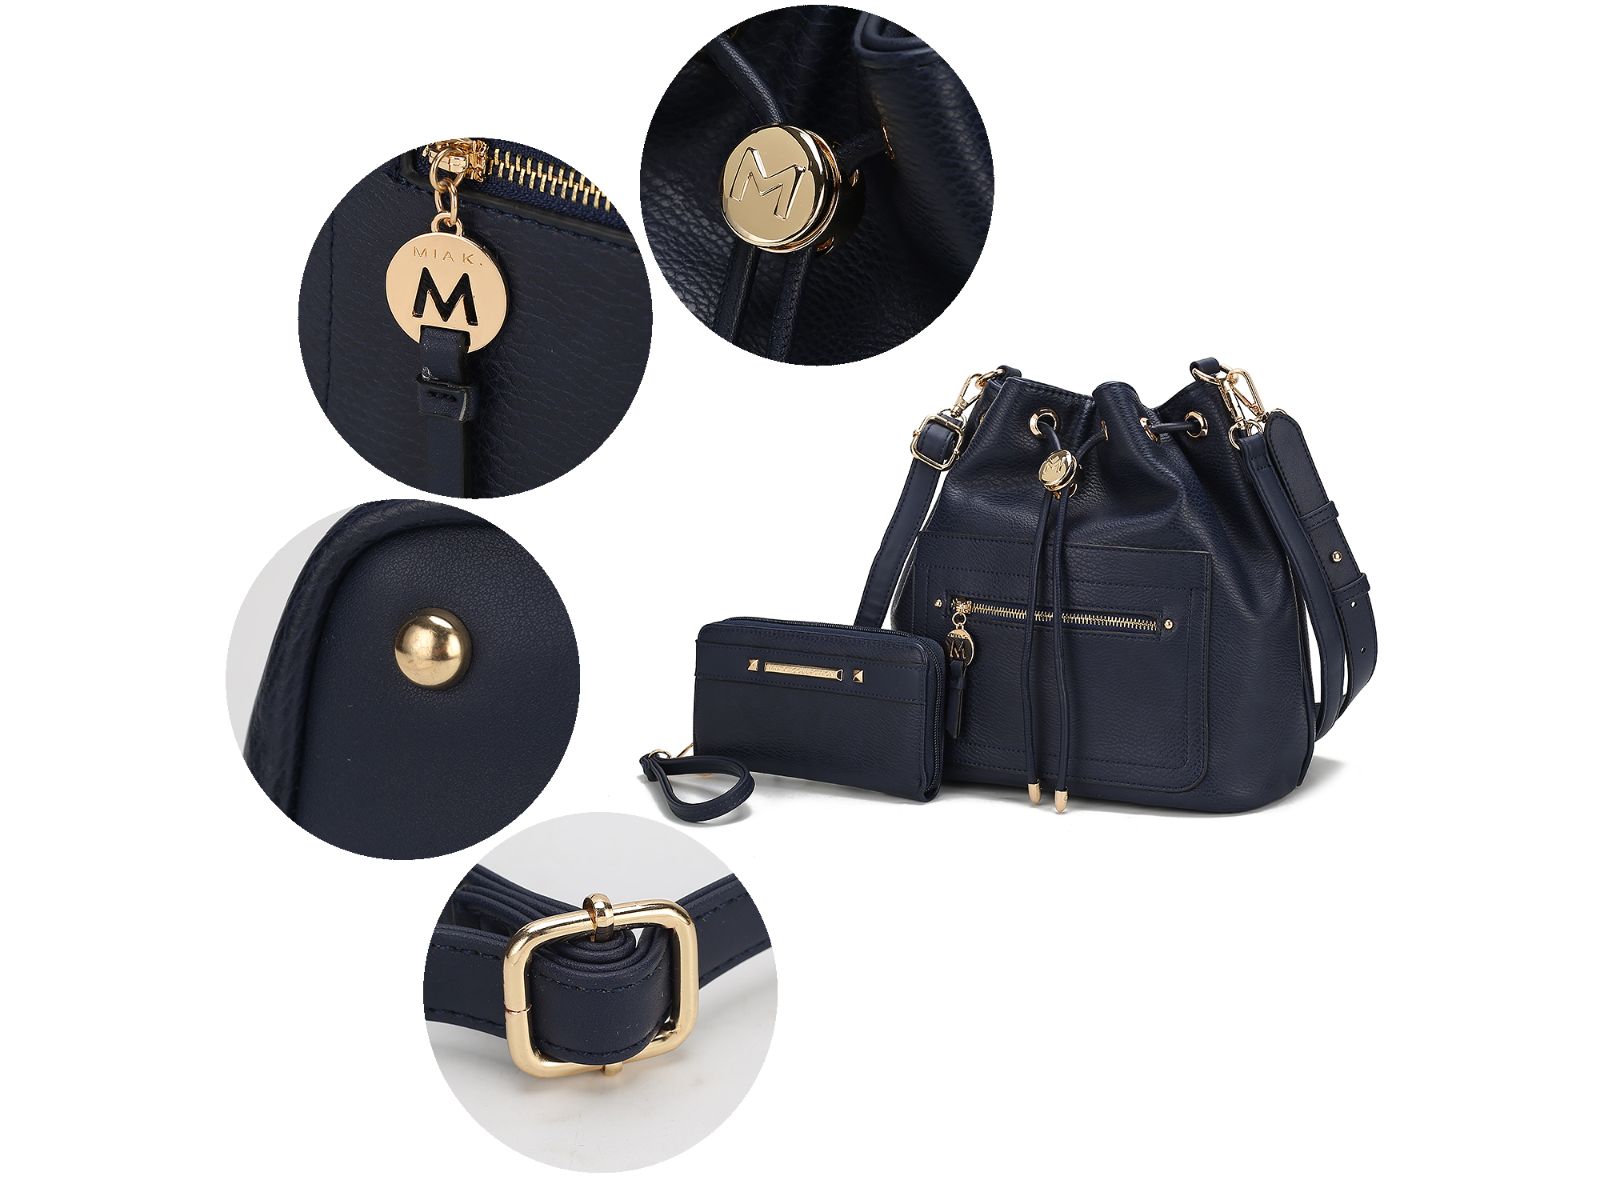 The Pink Orpheus Larissa Vegan Leather Women’s Bucket Bag with Wallet is a stylish and versatile accessory crafted from vegan leather. This blue bag features luxurious gold hardware and comes with a convenient key ring. It also includes an adjustable strap for added convenience.